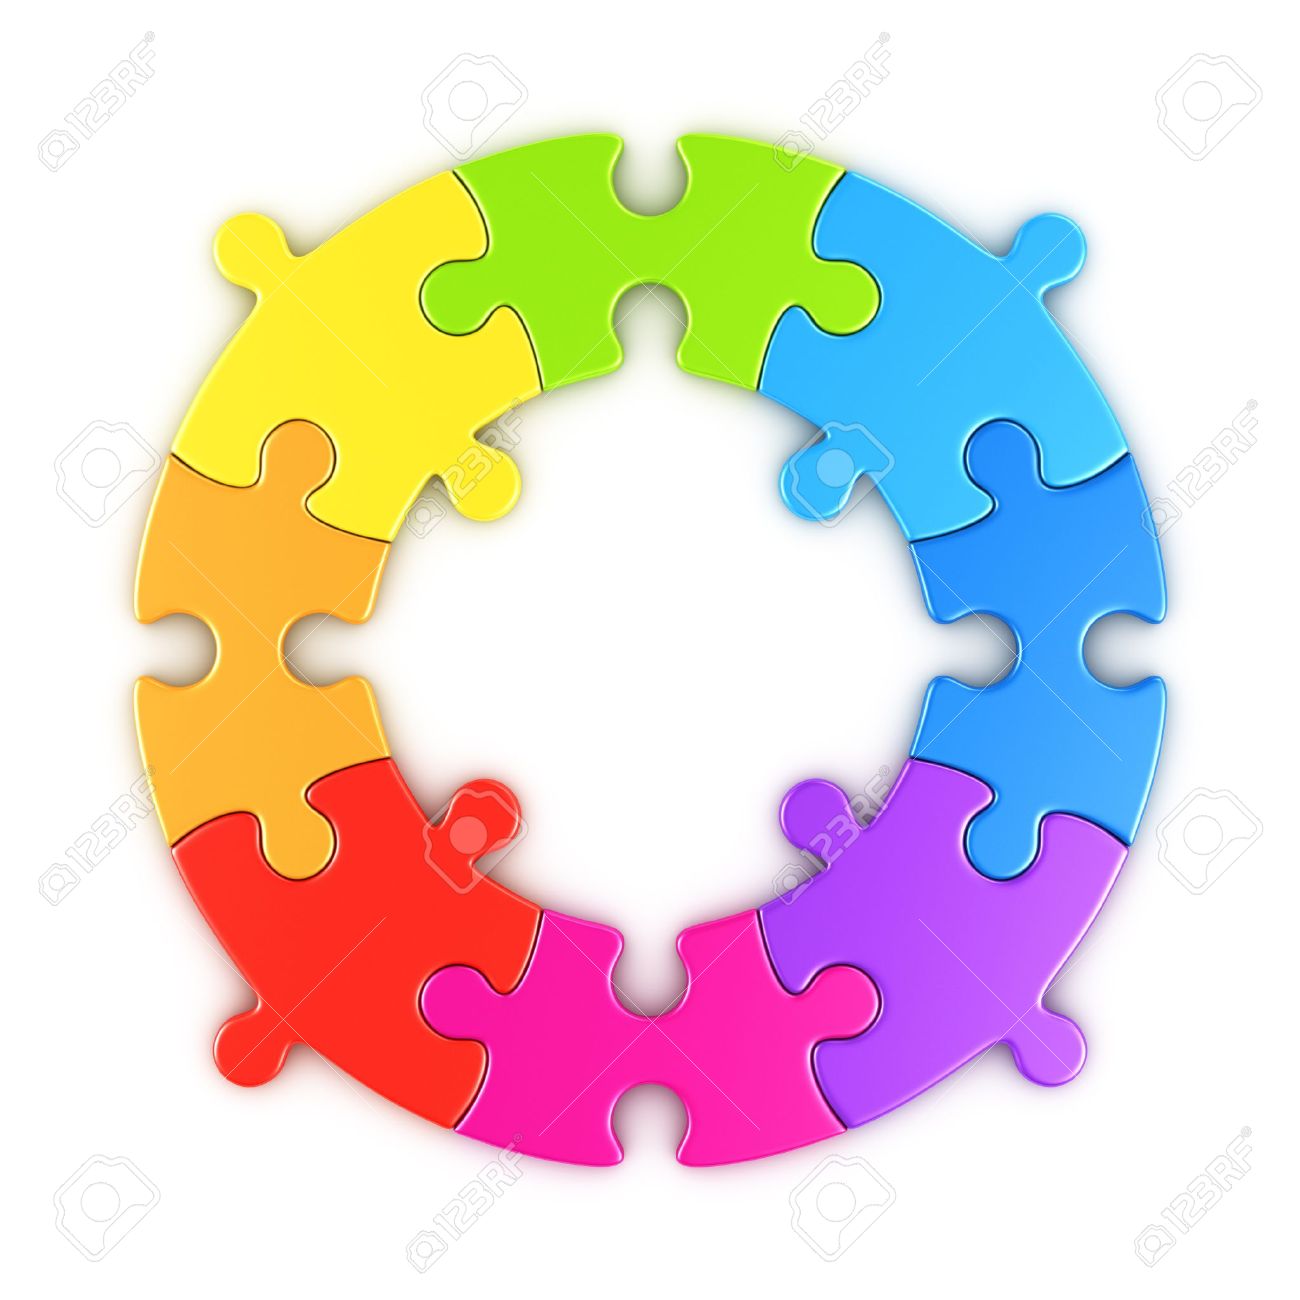 Circle Puzzle Illustrations And Clipart